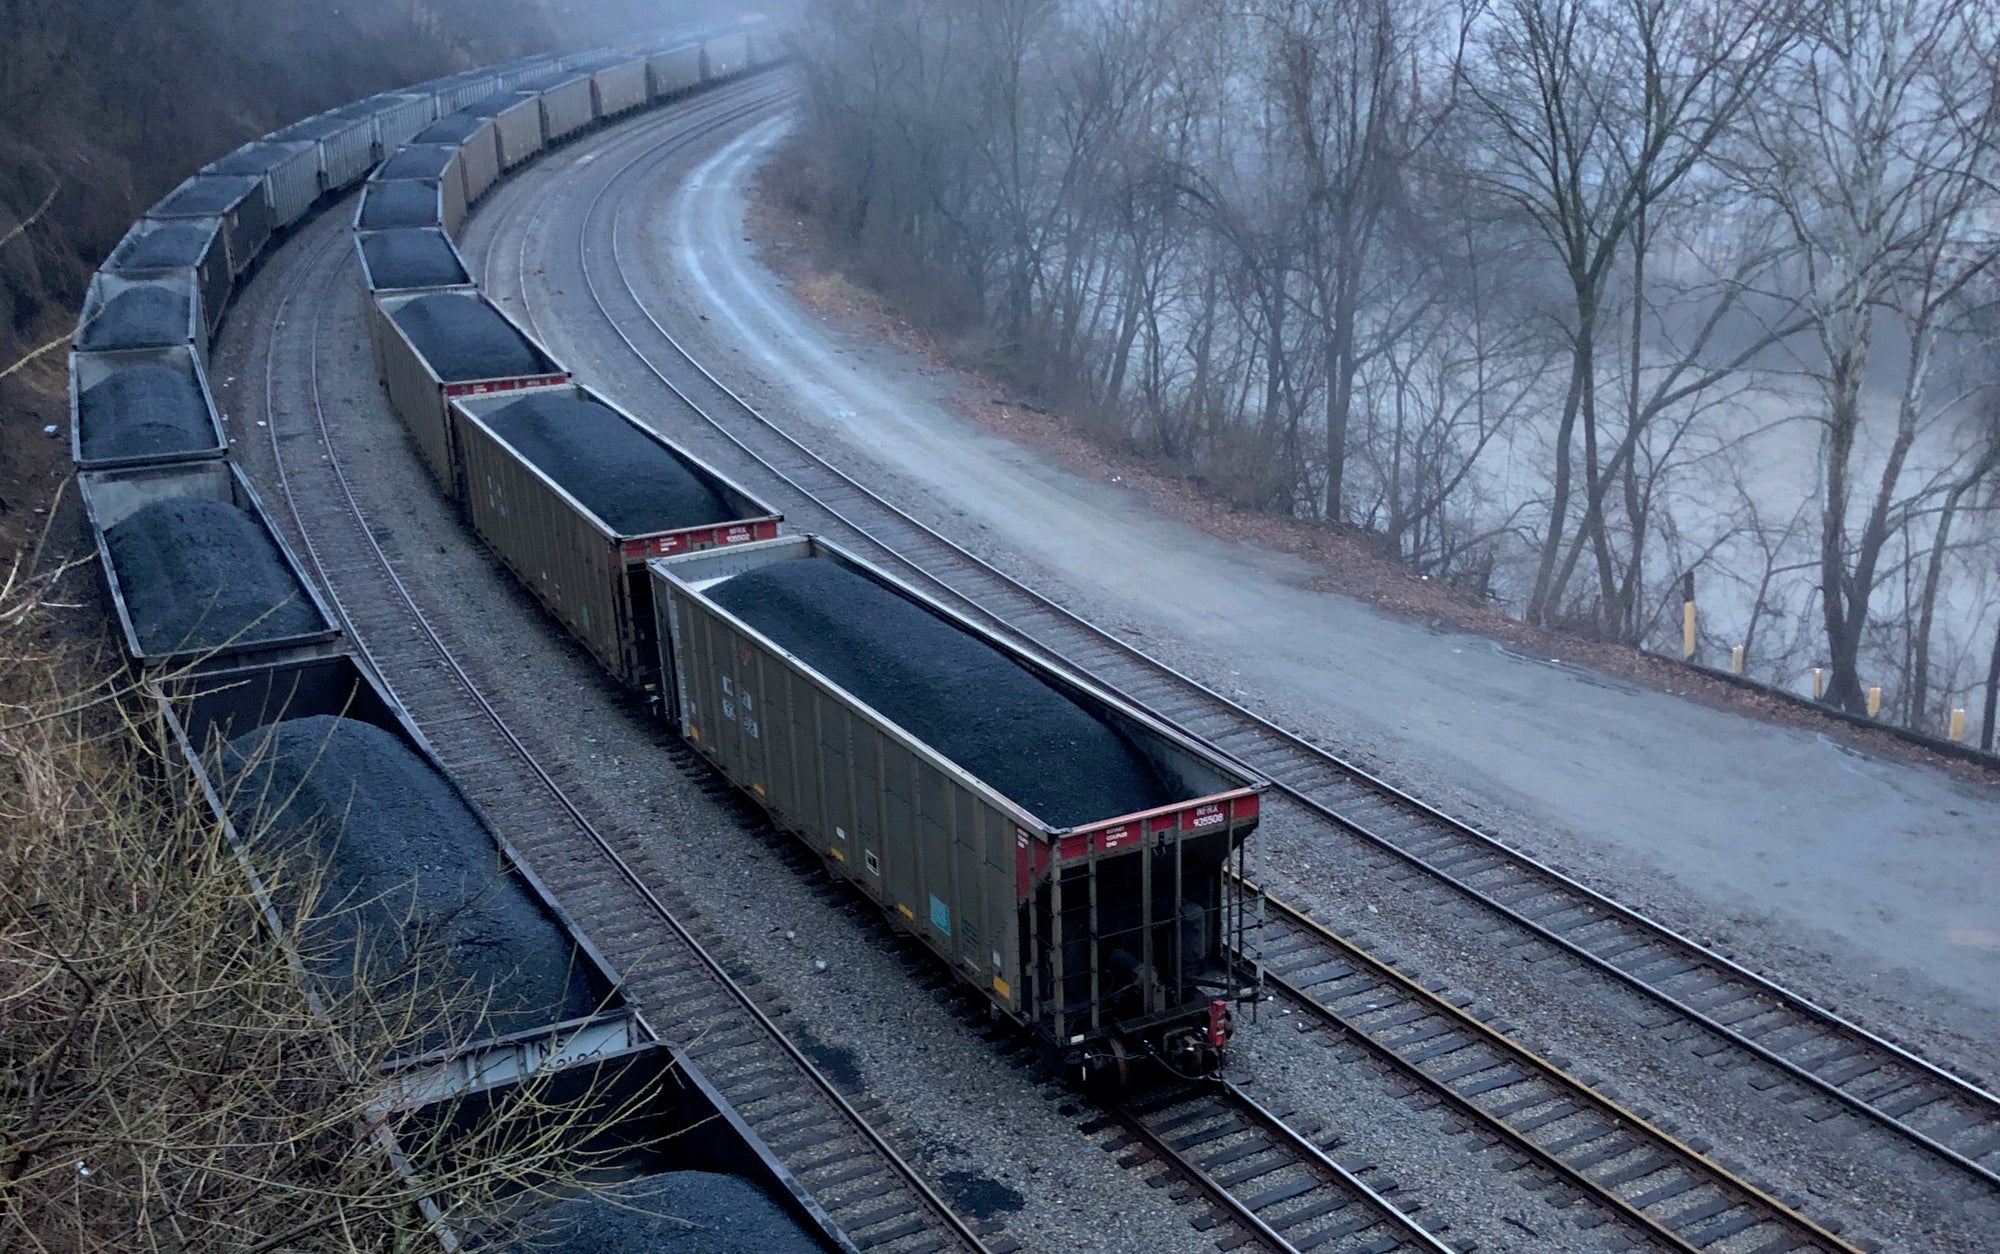 courier journal: Laid-off miners block train